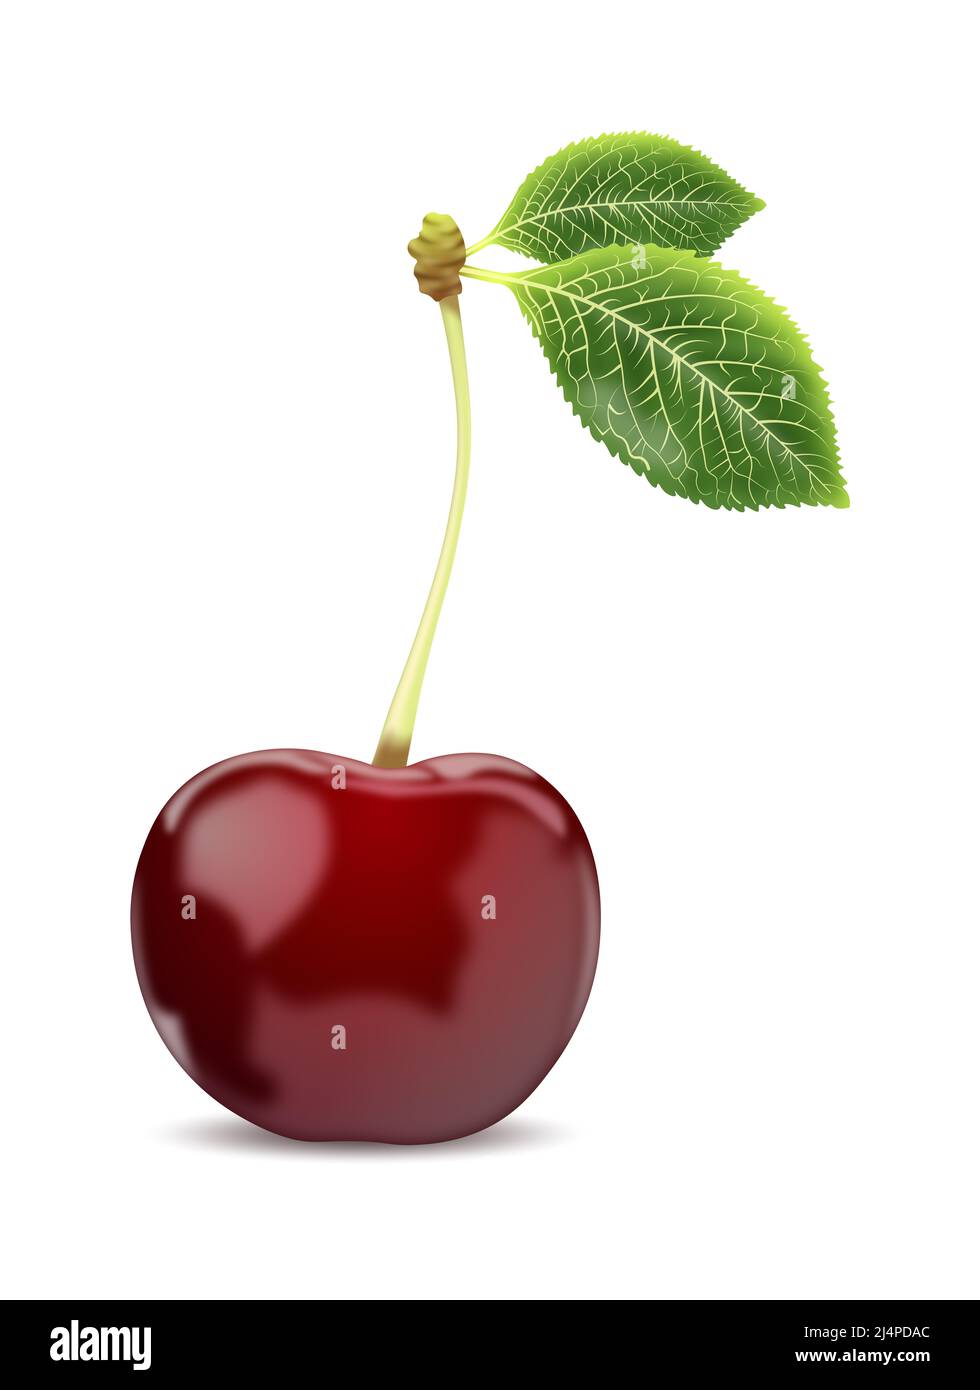 Illustration of one isolated sweet cherry berry on the white background. Stock Photo